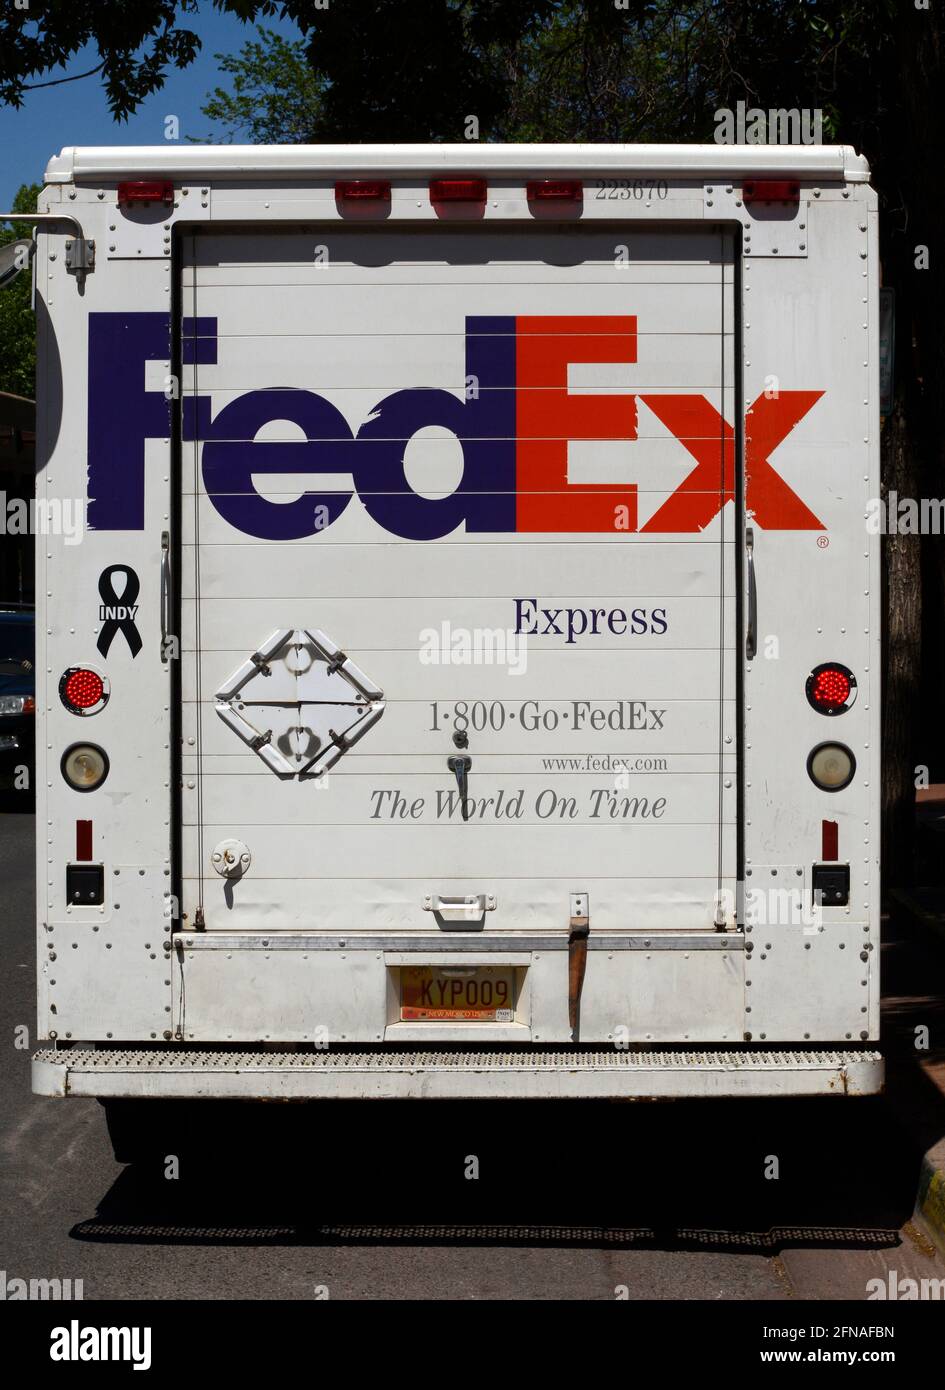 A FedEx (Federal Express) truck makes deliveries in Santa Fe, New Mexico. Stock Photo